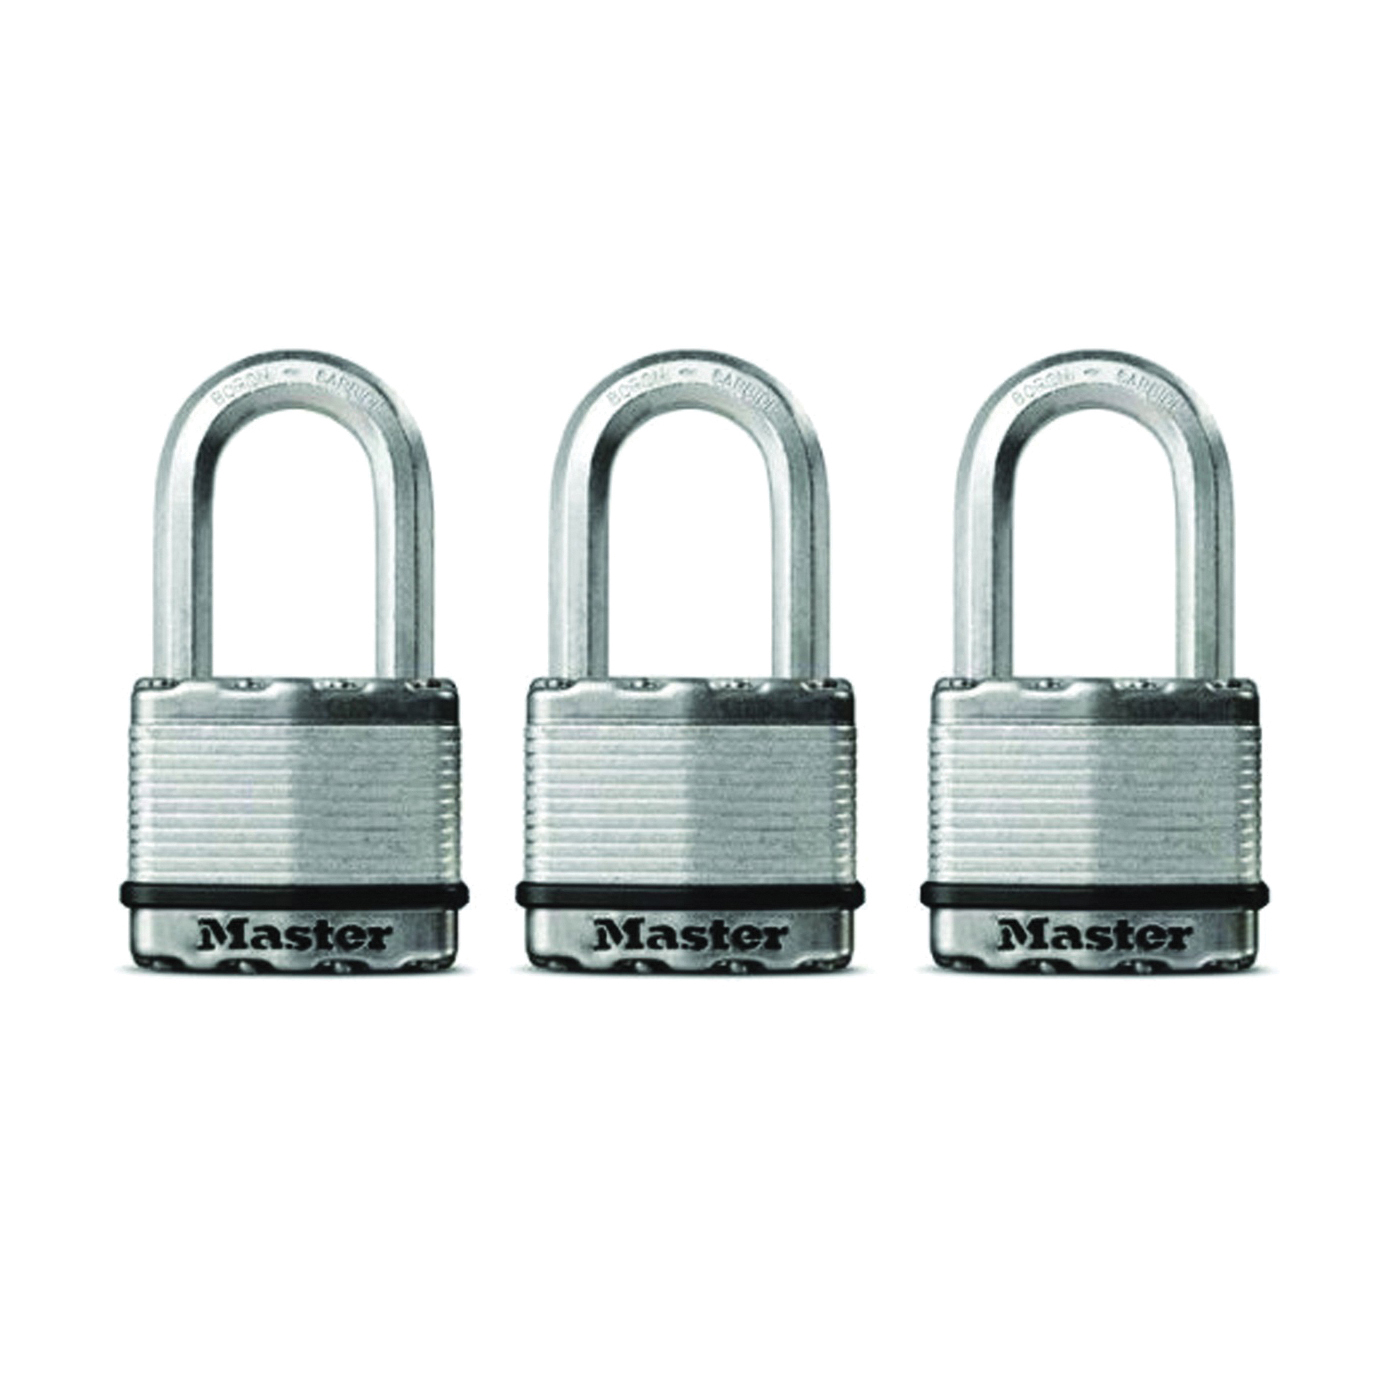 Magnum Series M5XTRILHCCSEN Padlock, Keyed Different Key, 3/8 in Dia Shackle, 2 in H Shackle, Zinc